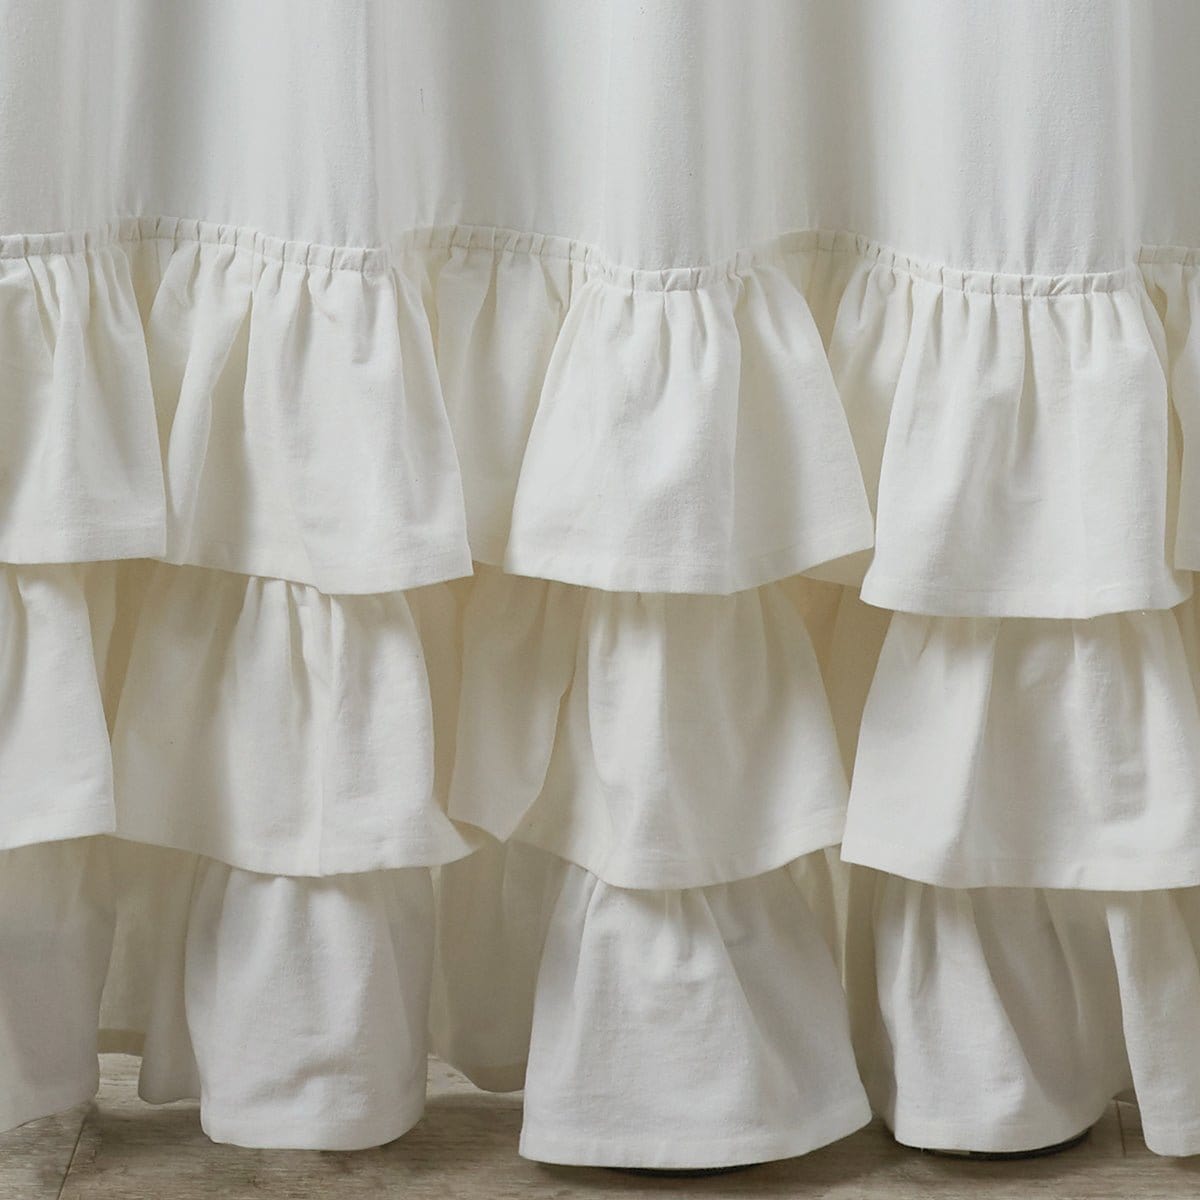 Ruffle in White Panel Pair With Tie Backs 84" Long-Park Designs-The Village Merchant